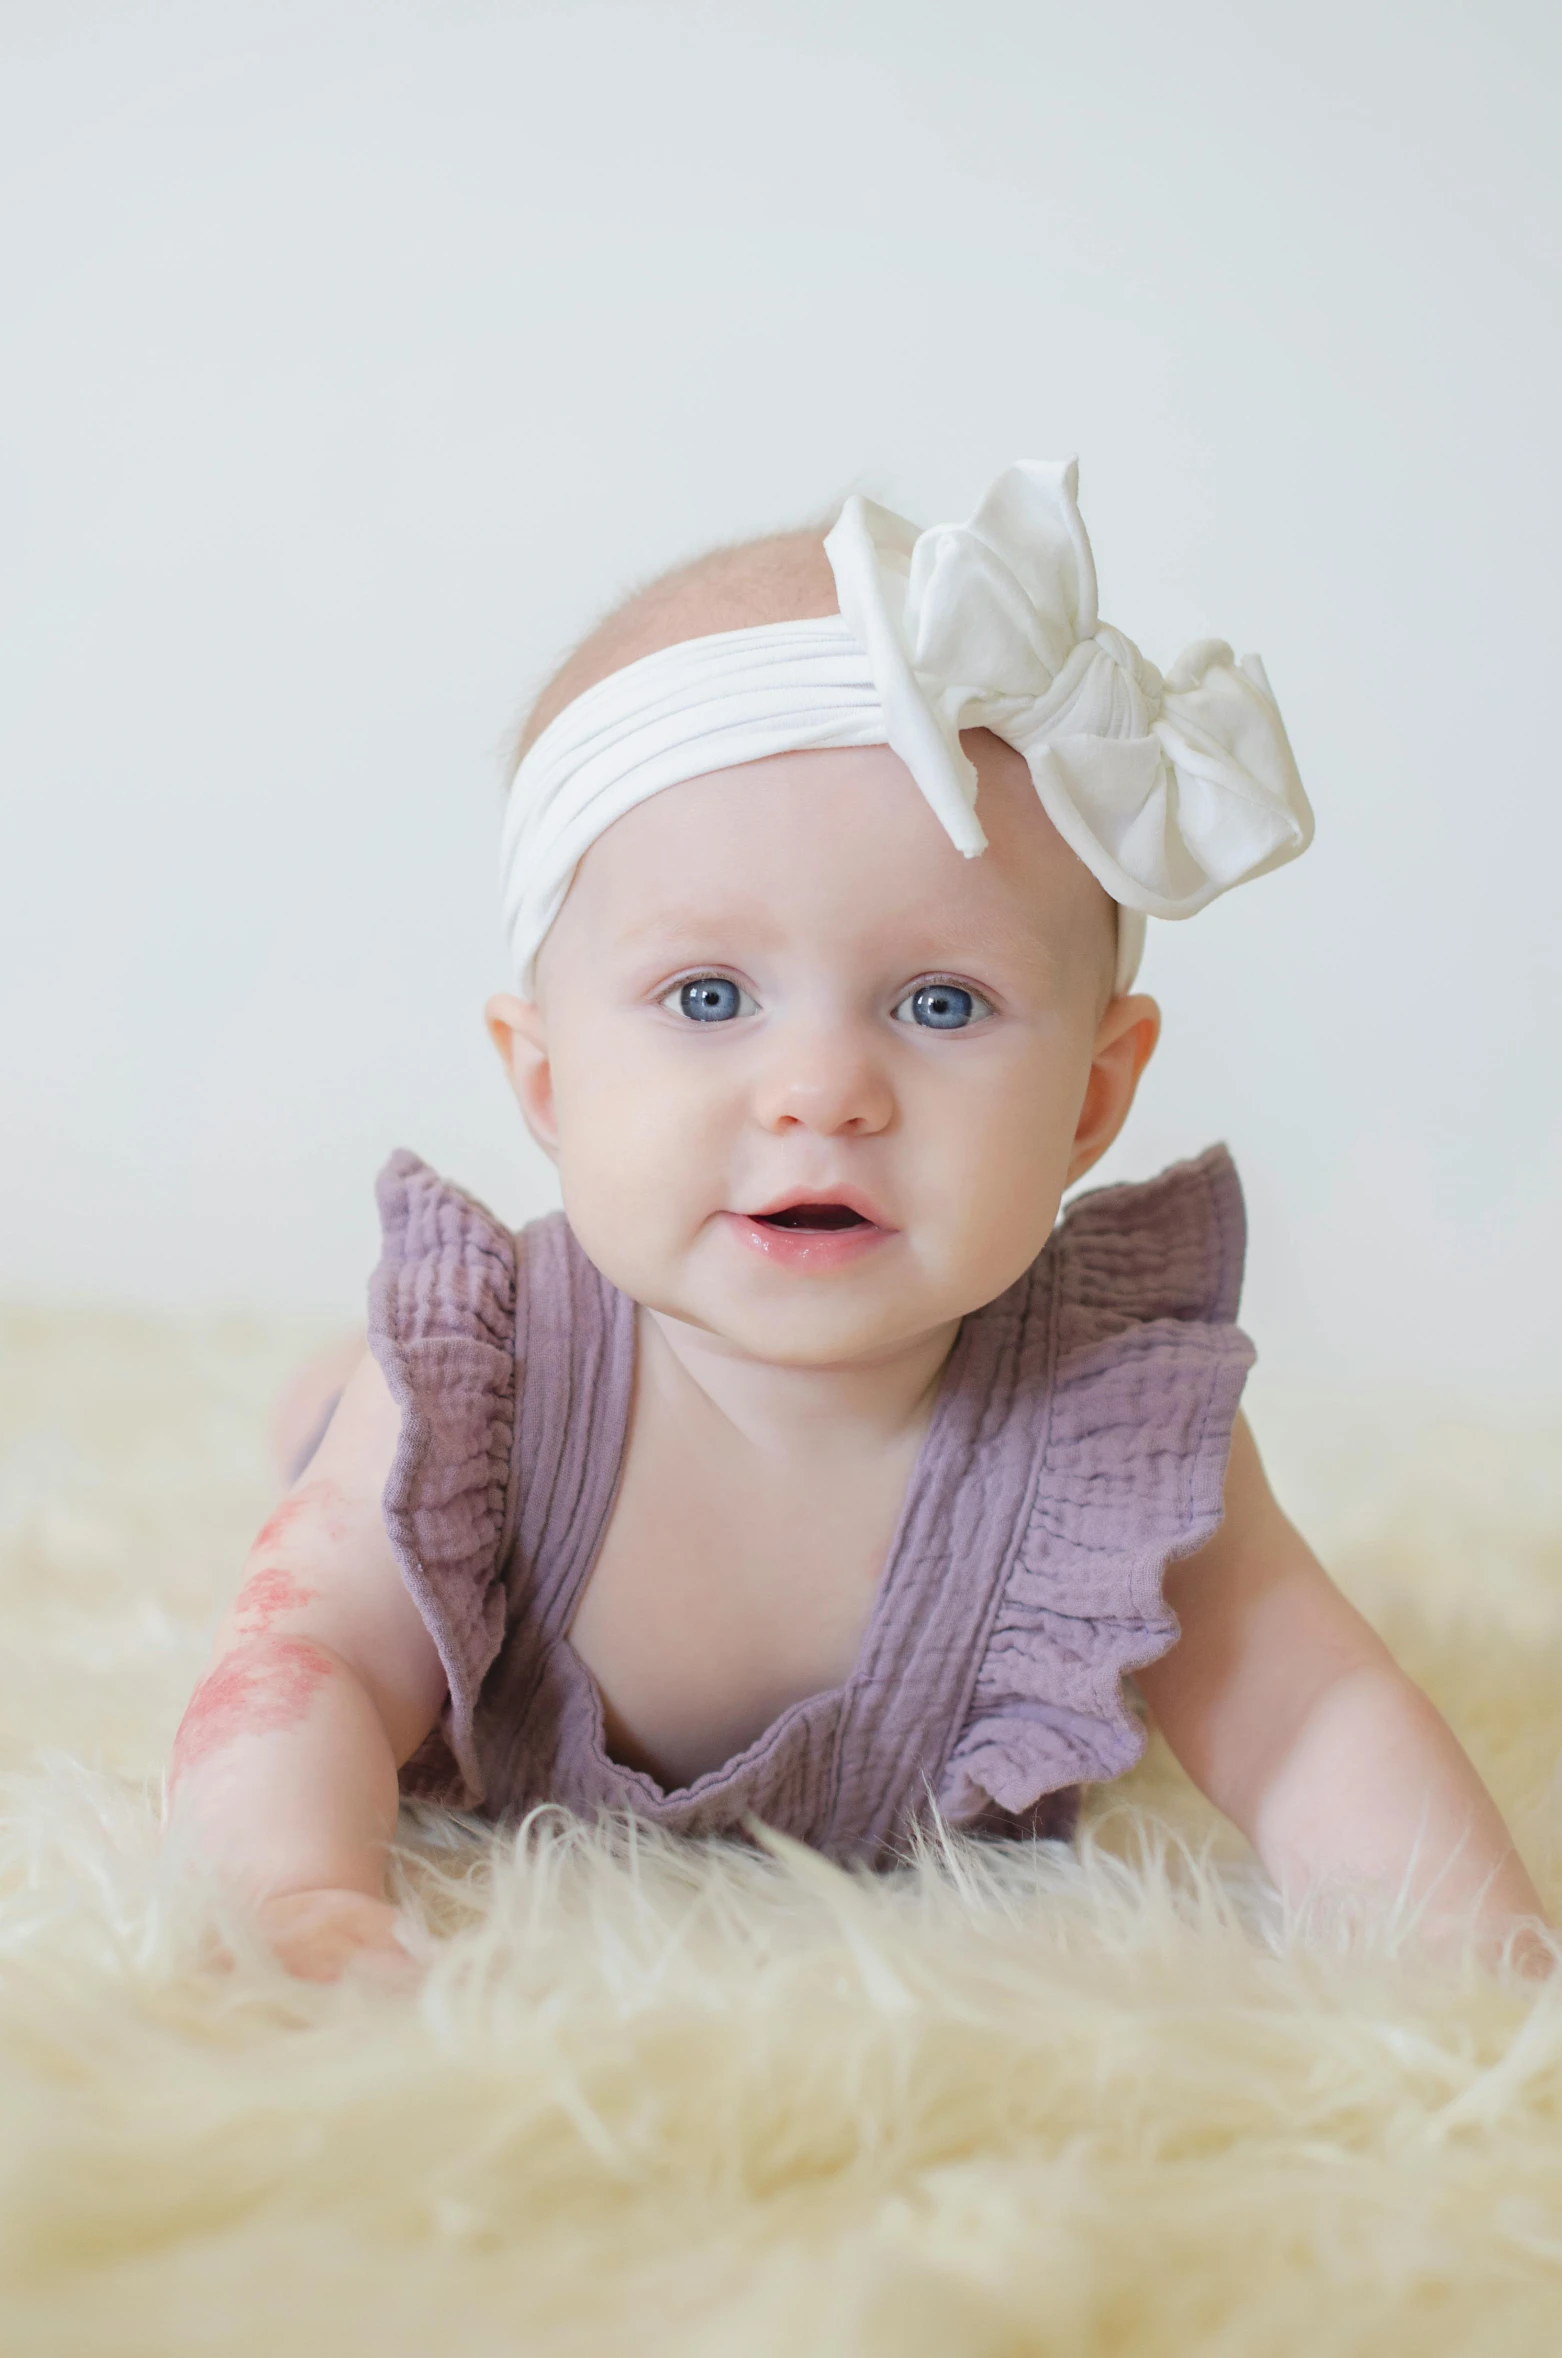 a baby girl wearing a purple dress and a white headband, albino skin, face enhanced, hair bow, professionally color graded